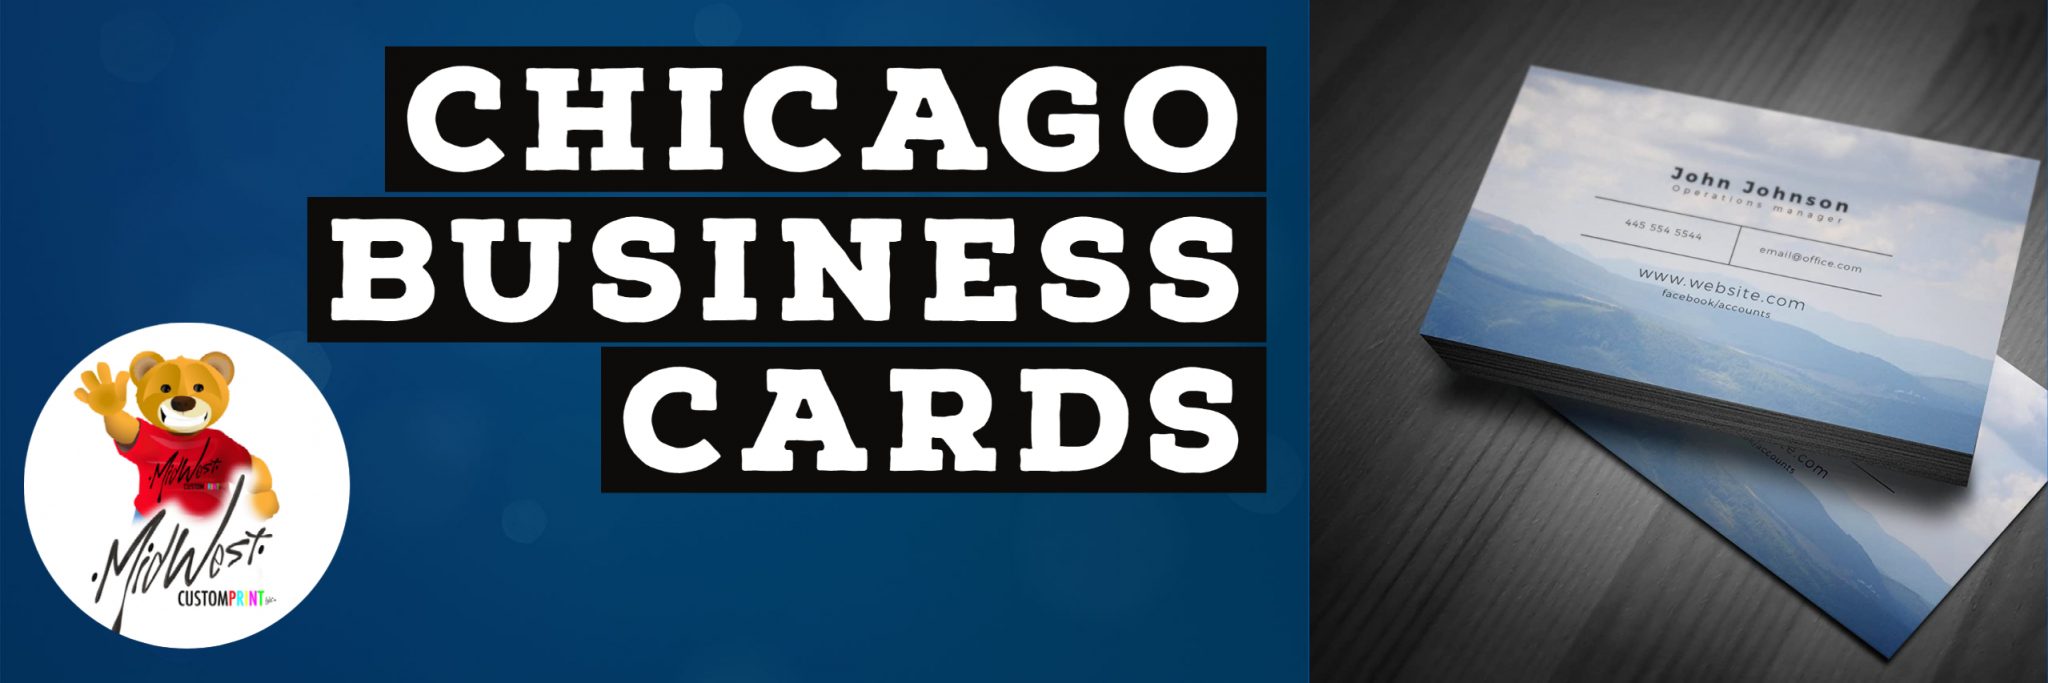 business cards chicago 1